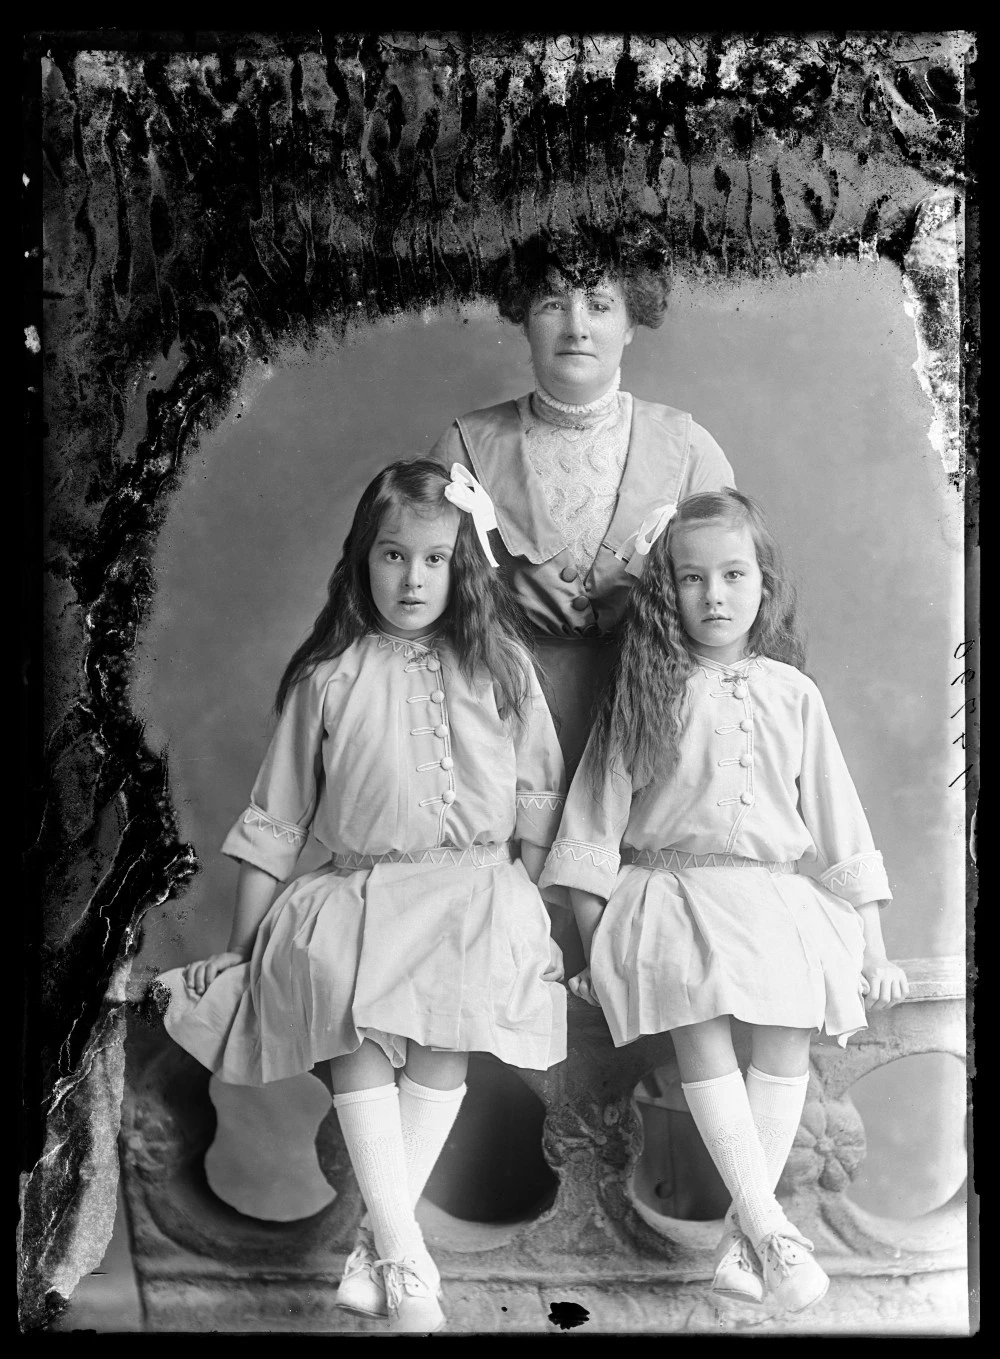 3/4 length portrait of Mrs Langton and two children.